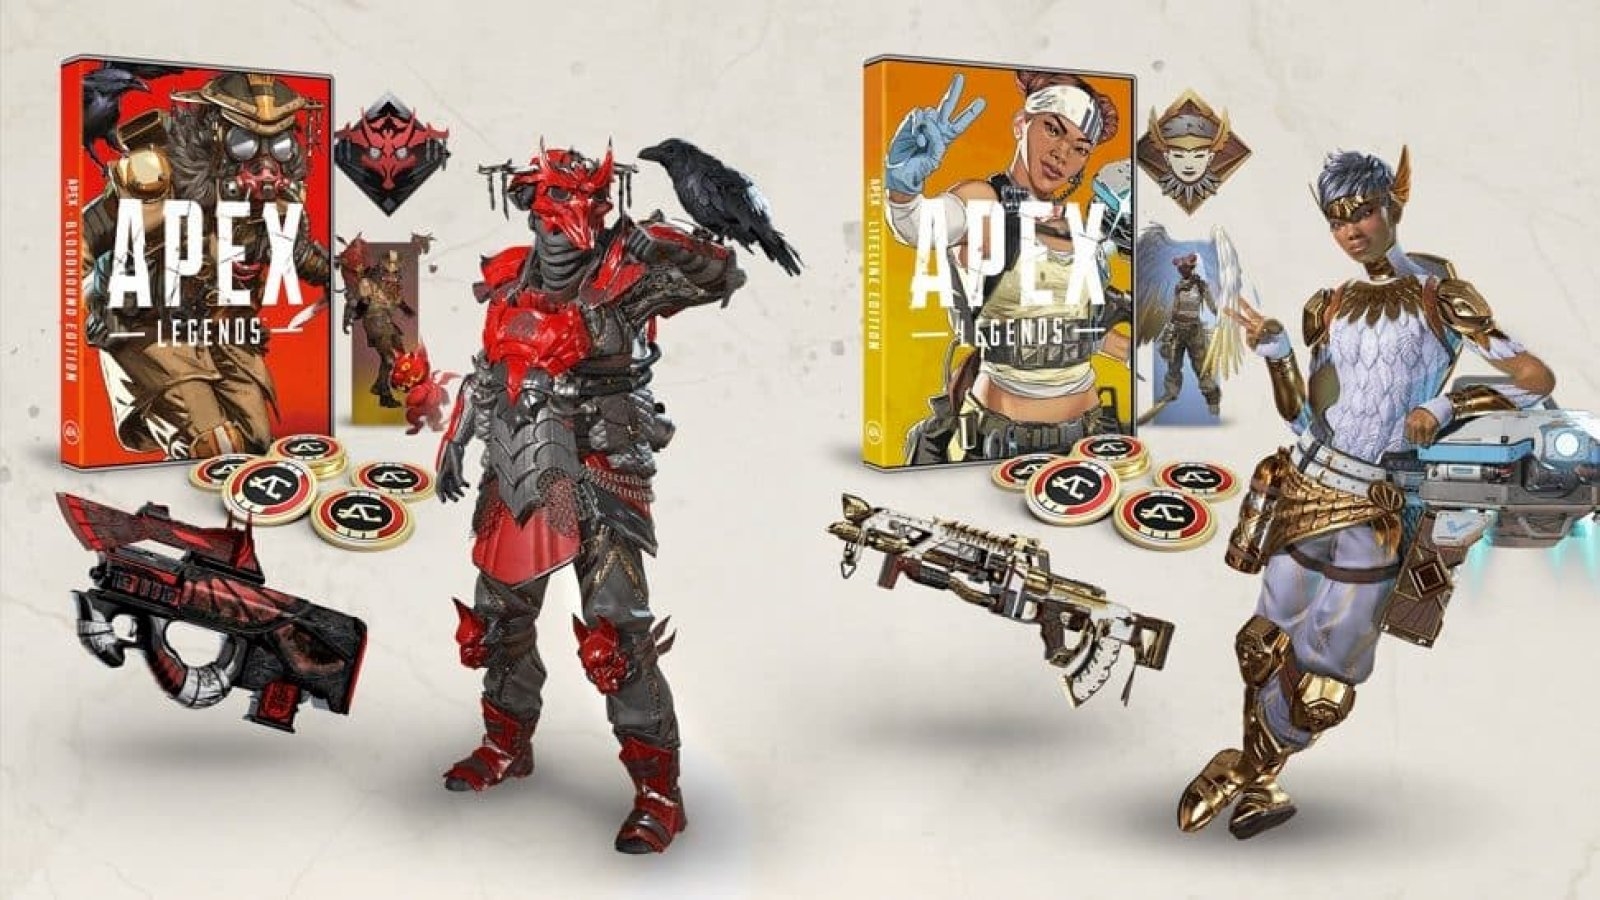 'Apex Legends' is getting physical editions with exclusive cosmetics | DeviceDaily.com